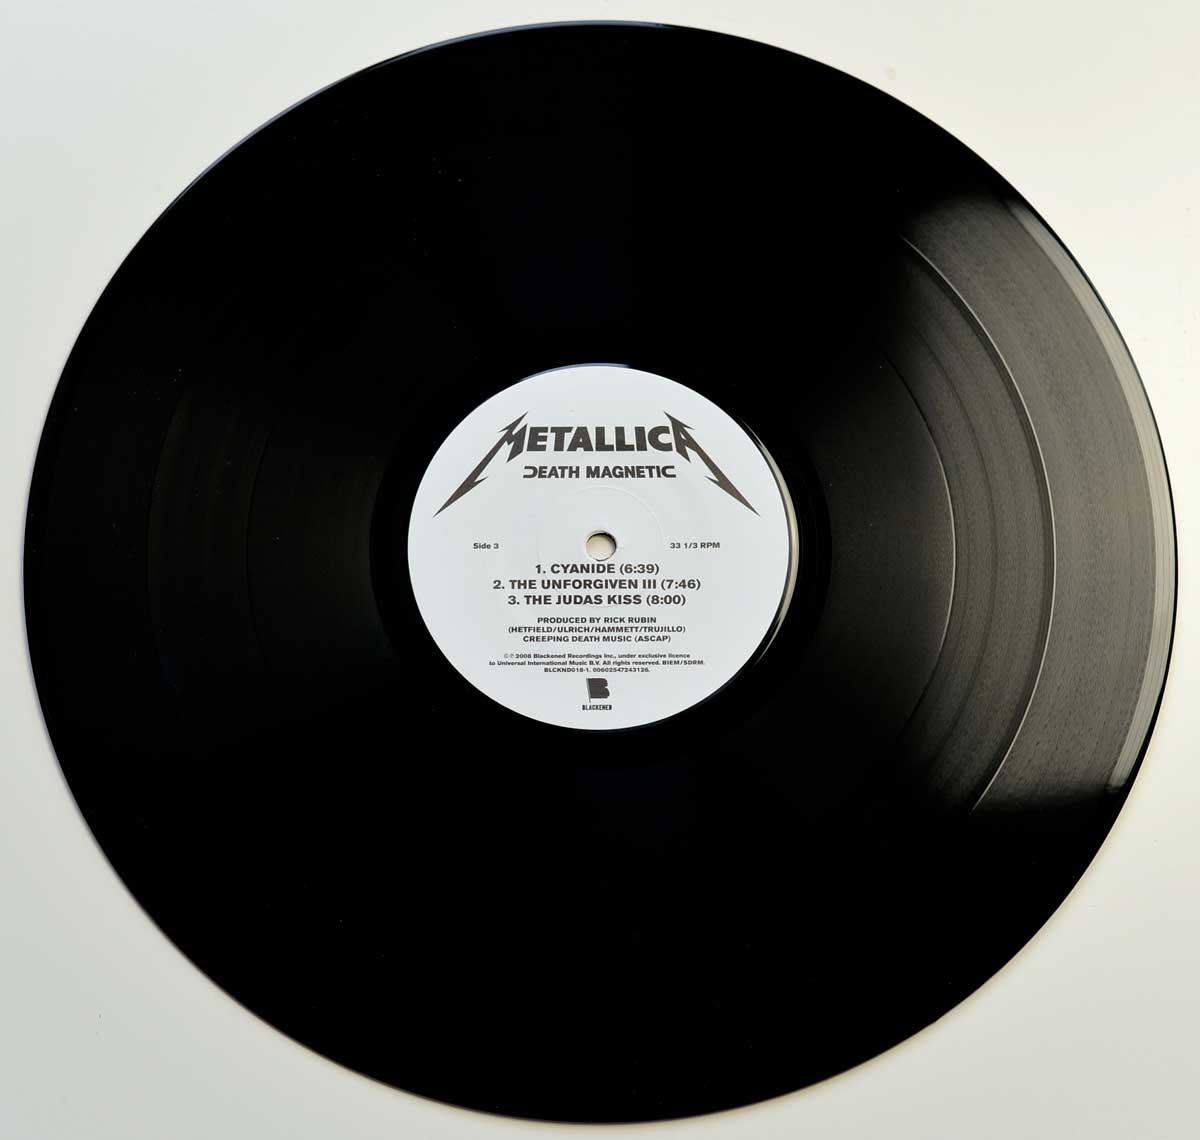 Photo of Side Three: of METALLICA - Death Magnetic Blackened Records Gatefold Cover 12" 